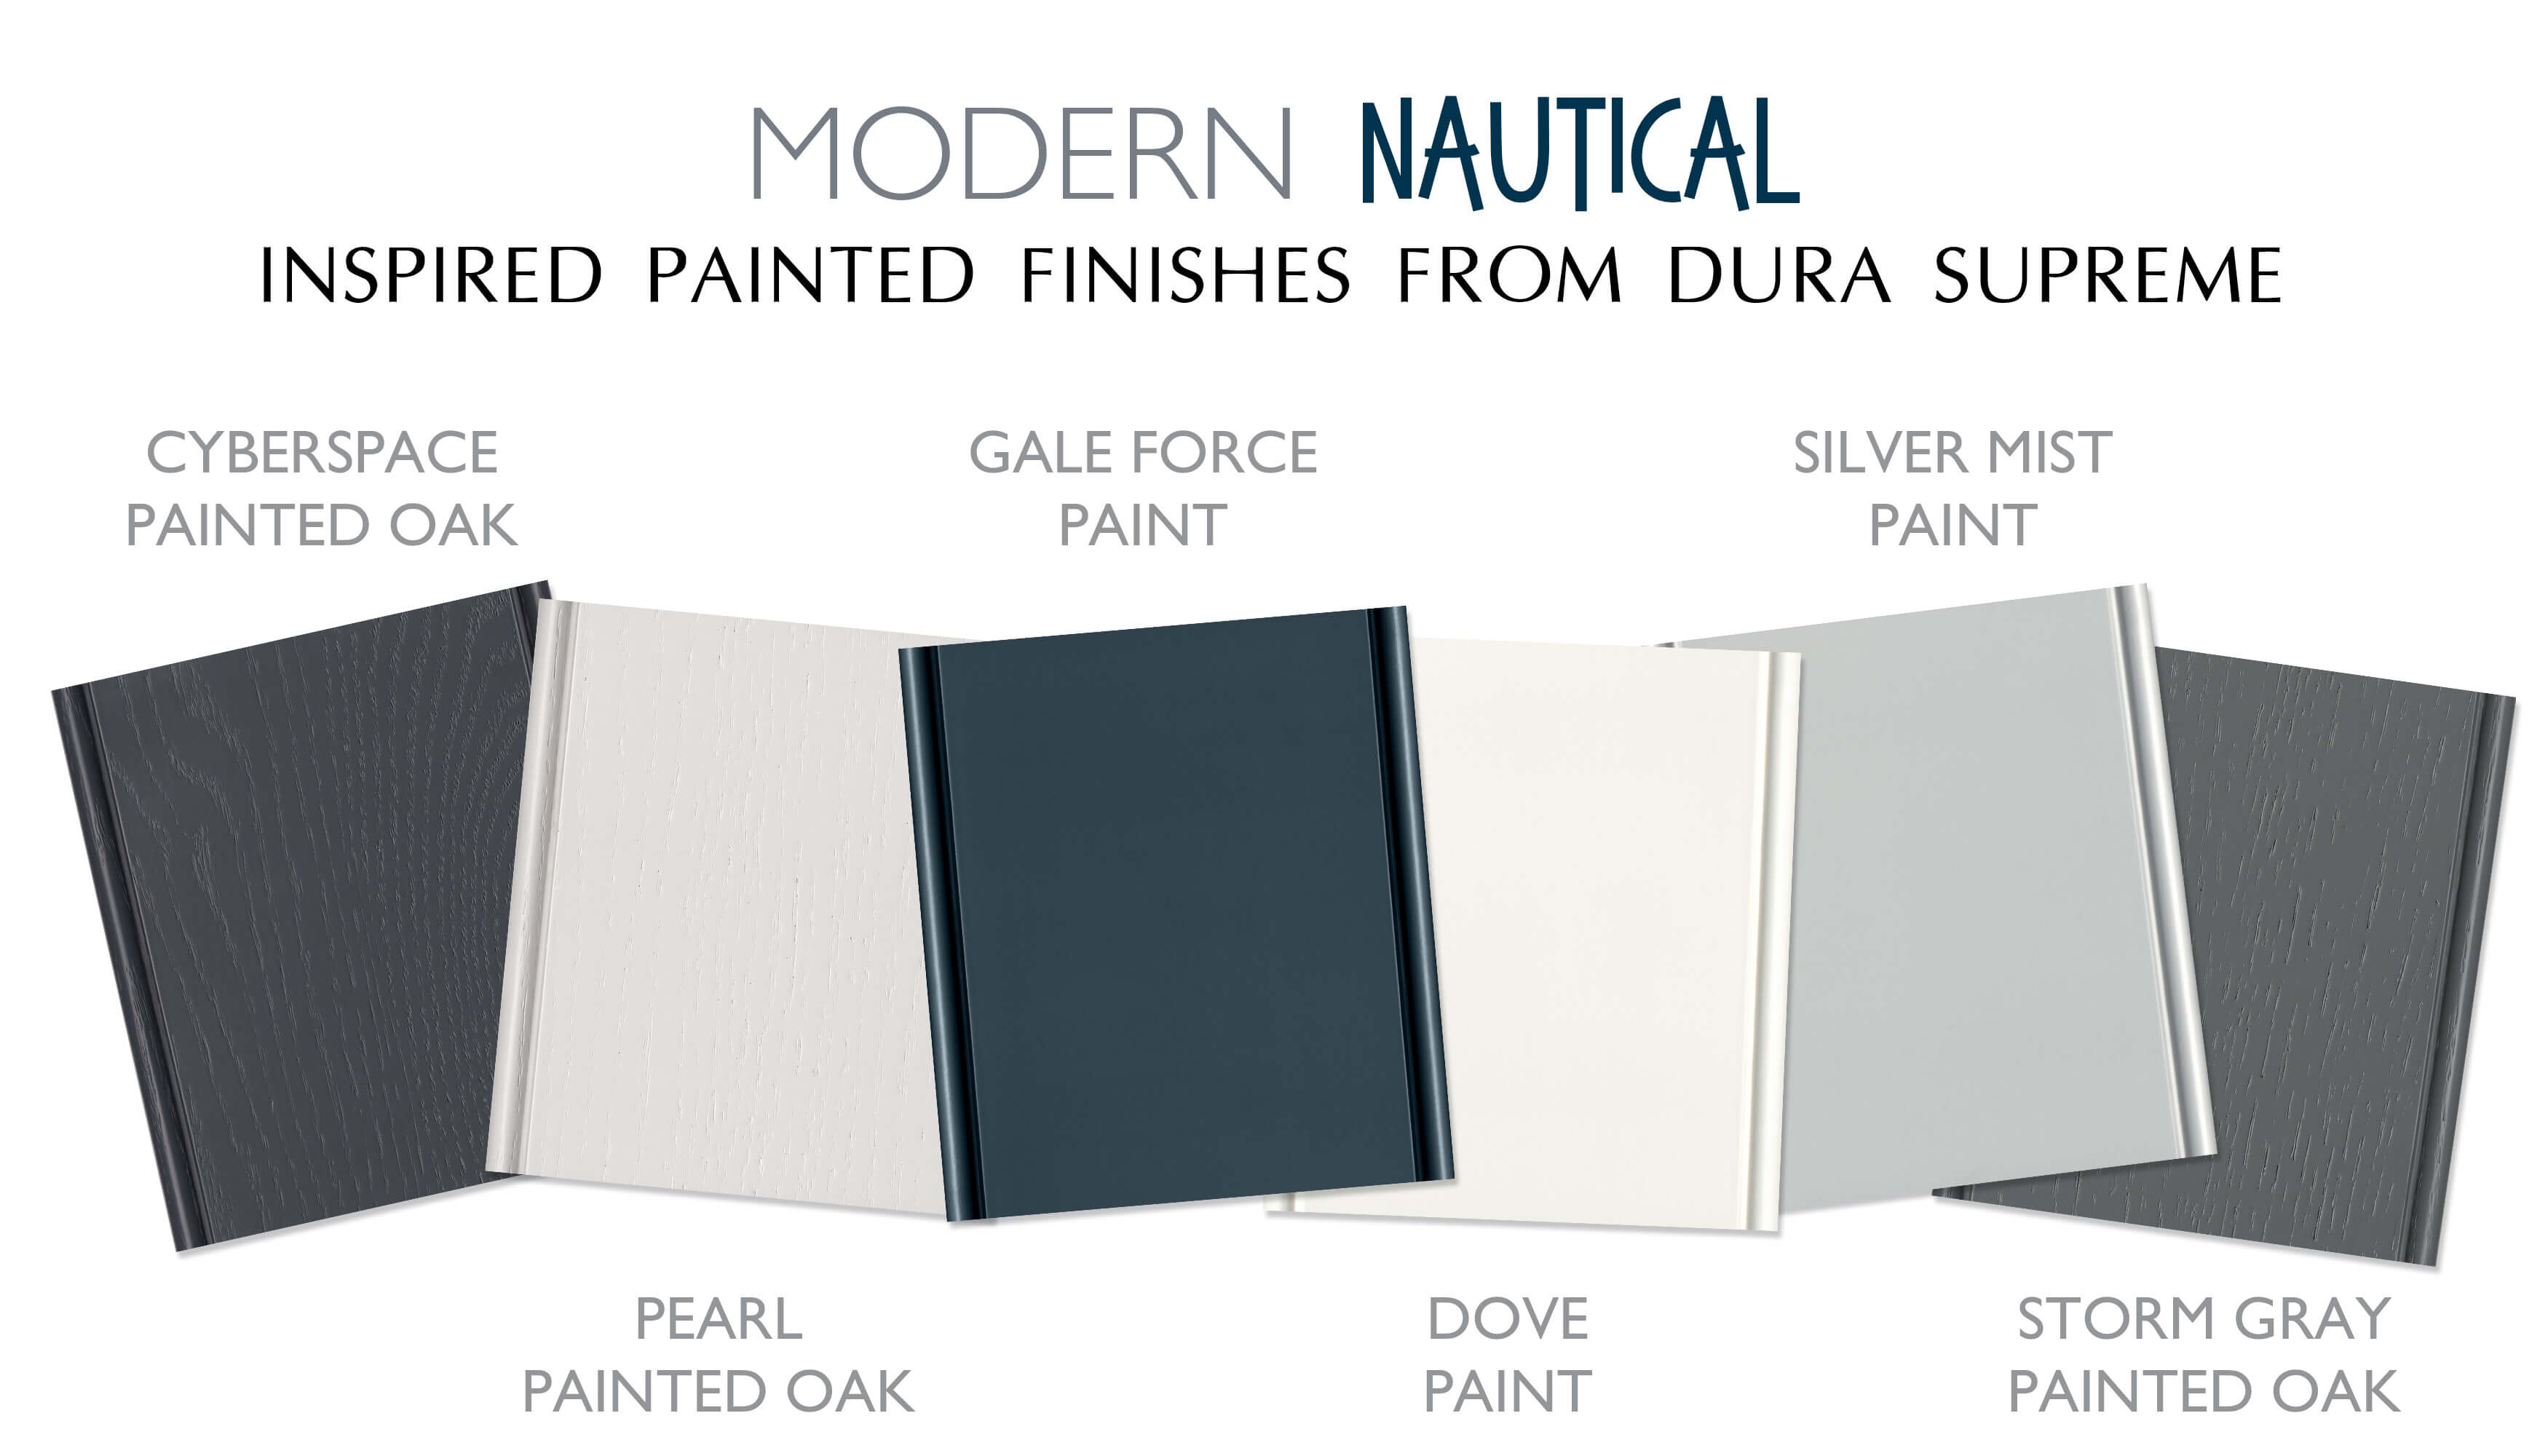 Modern Nautical Style painted finishes for kitchen and bath cabinets from Dura Supreme Cabintery